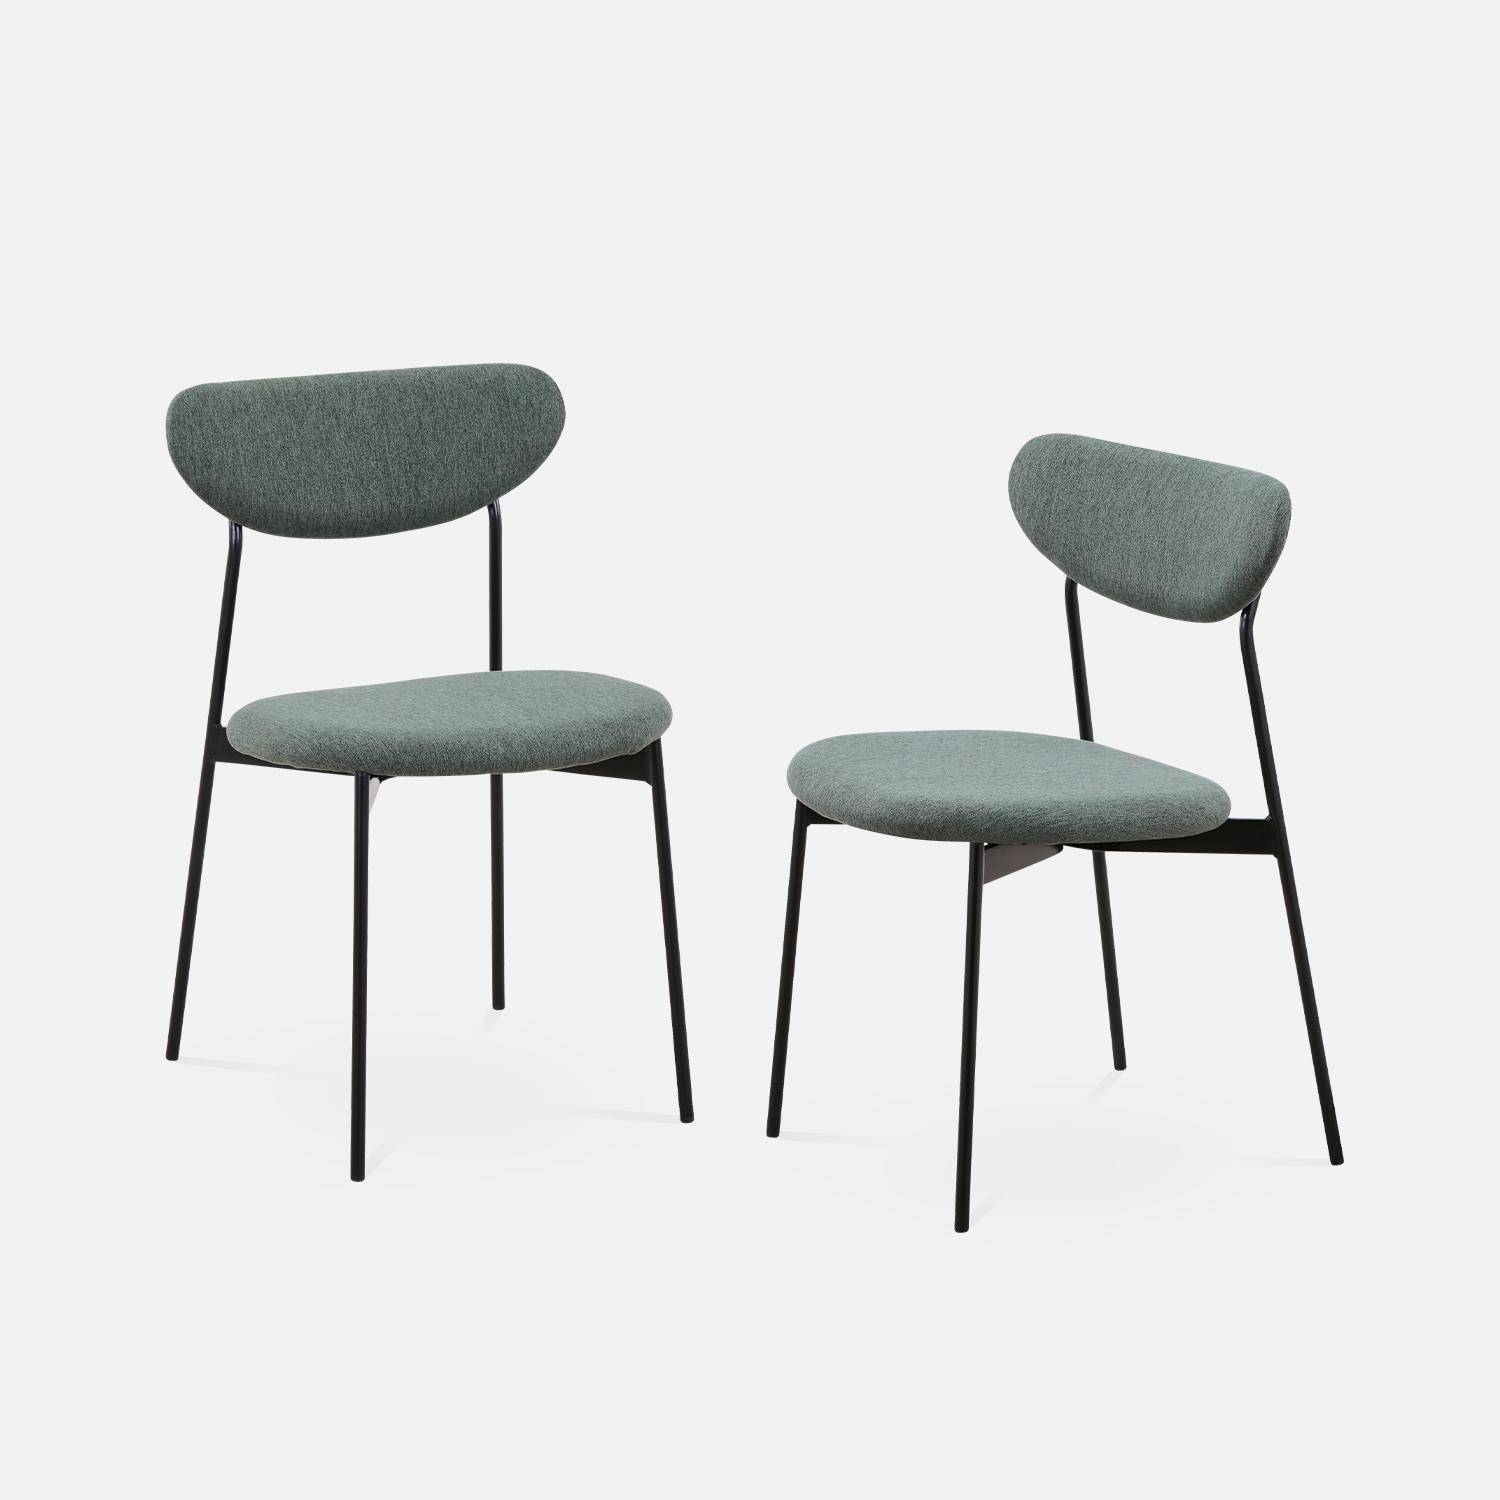 Set of 2 retro style dining chairs with steel legs - Arty - Green,sweeek,Photo3